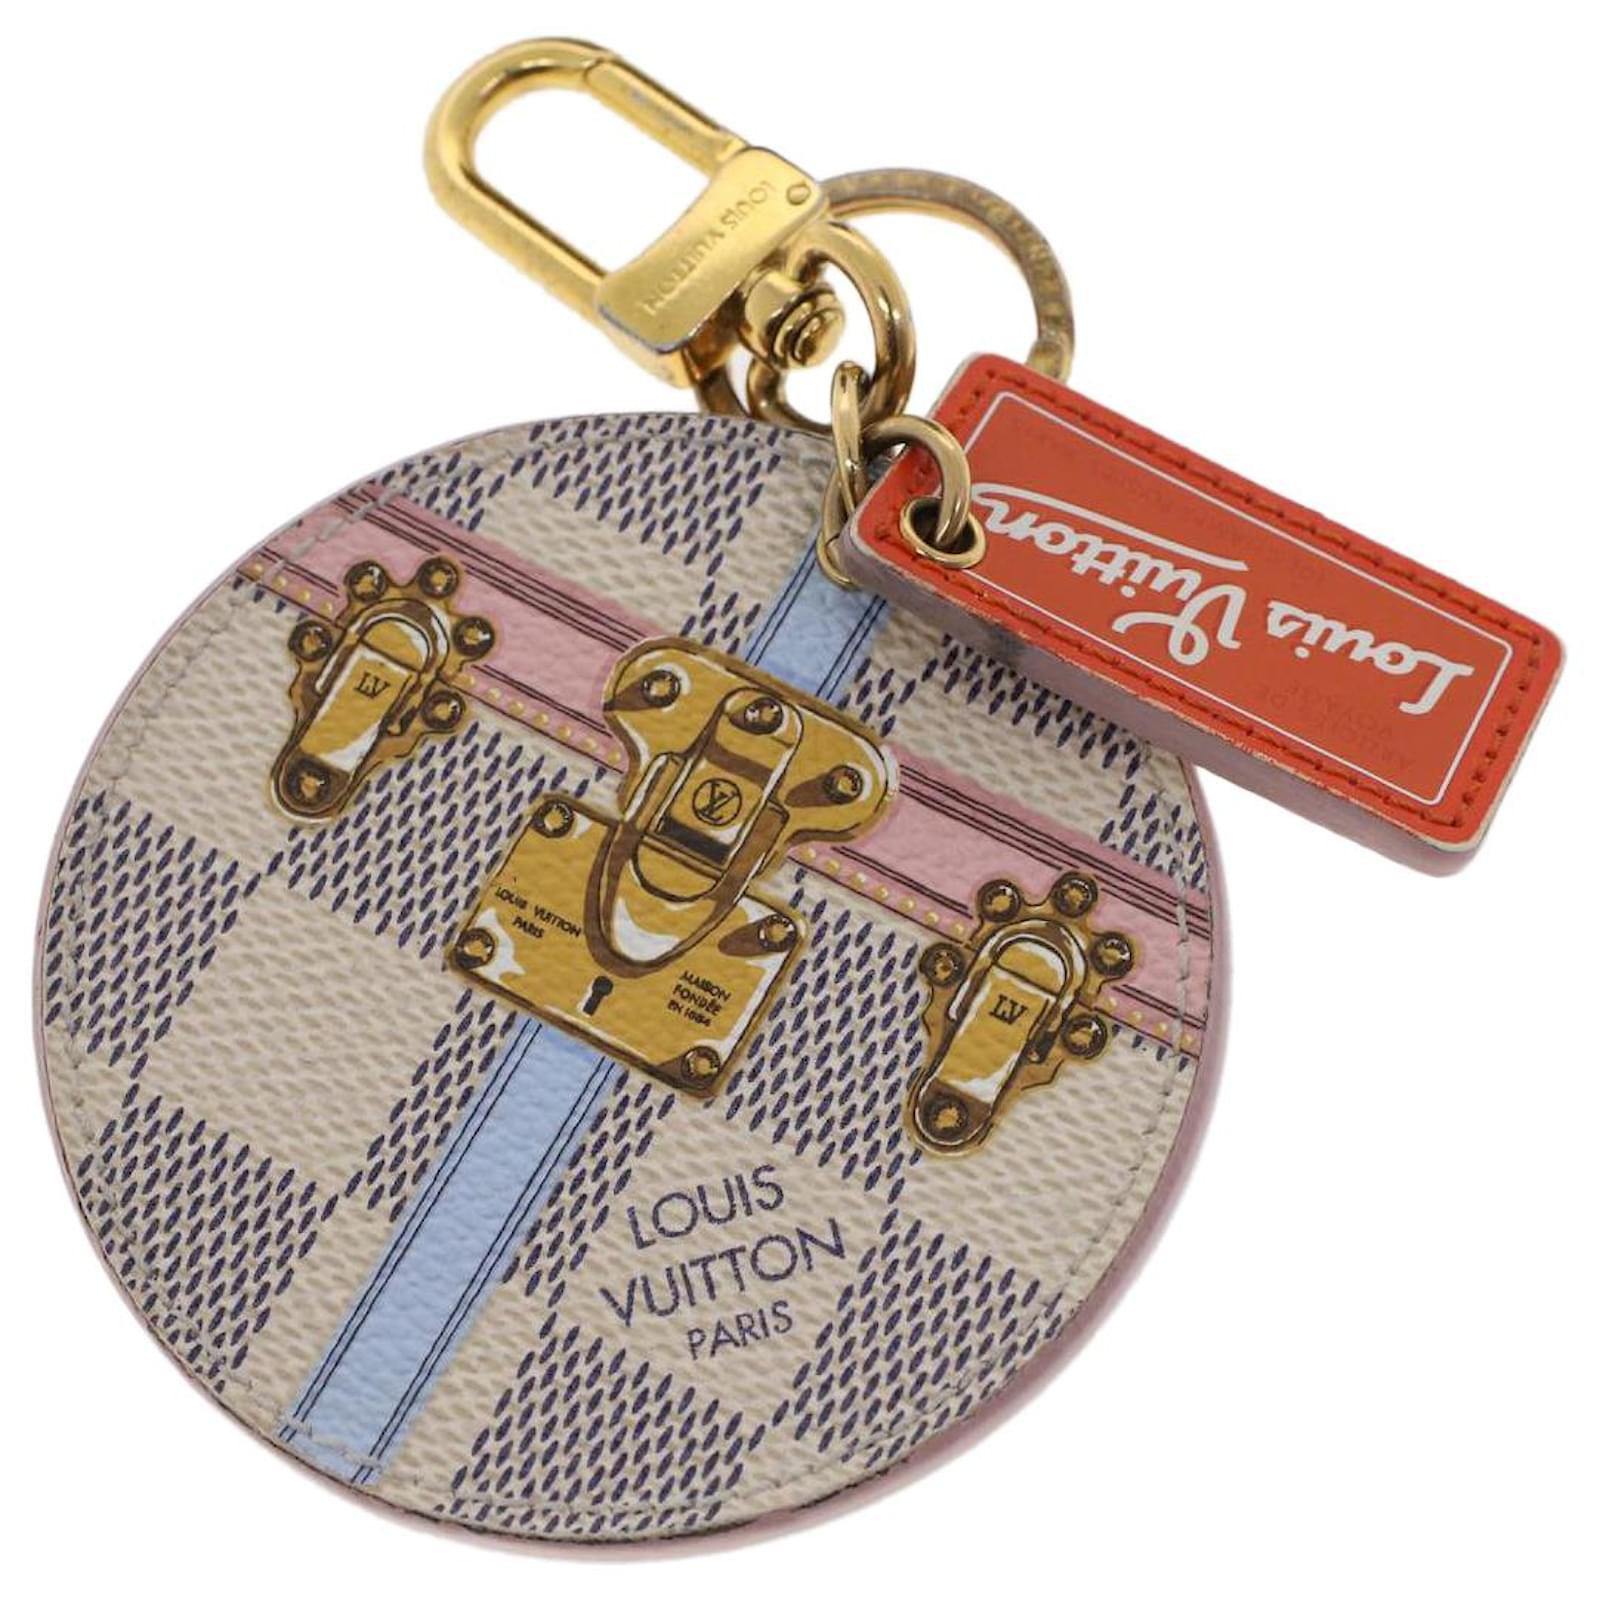 Louis Vuitton Trunks and Bags Bag Charm and Key Holder Metal and